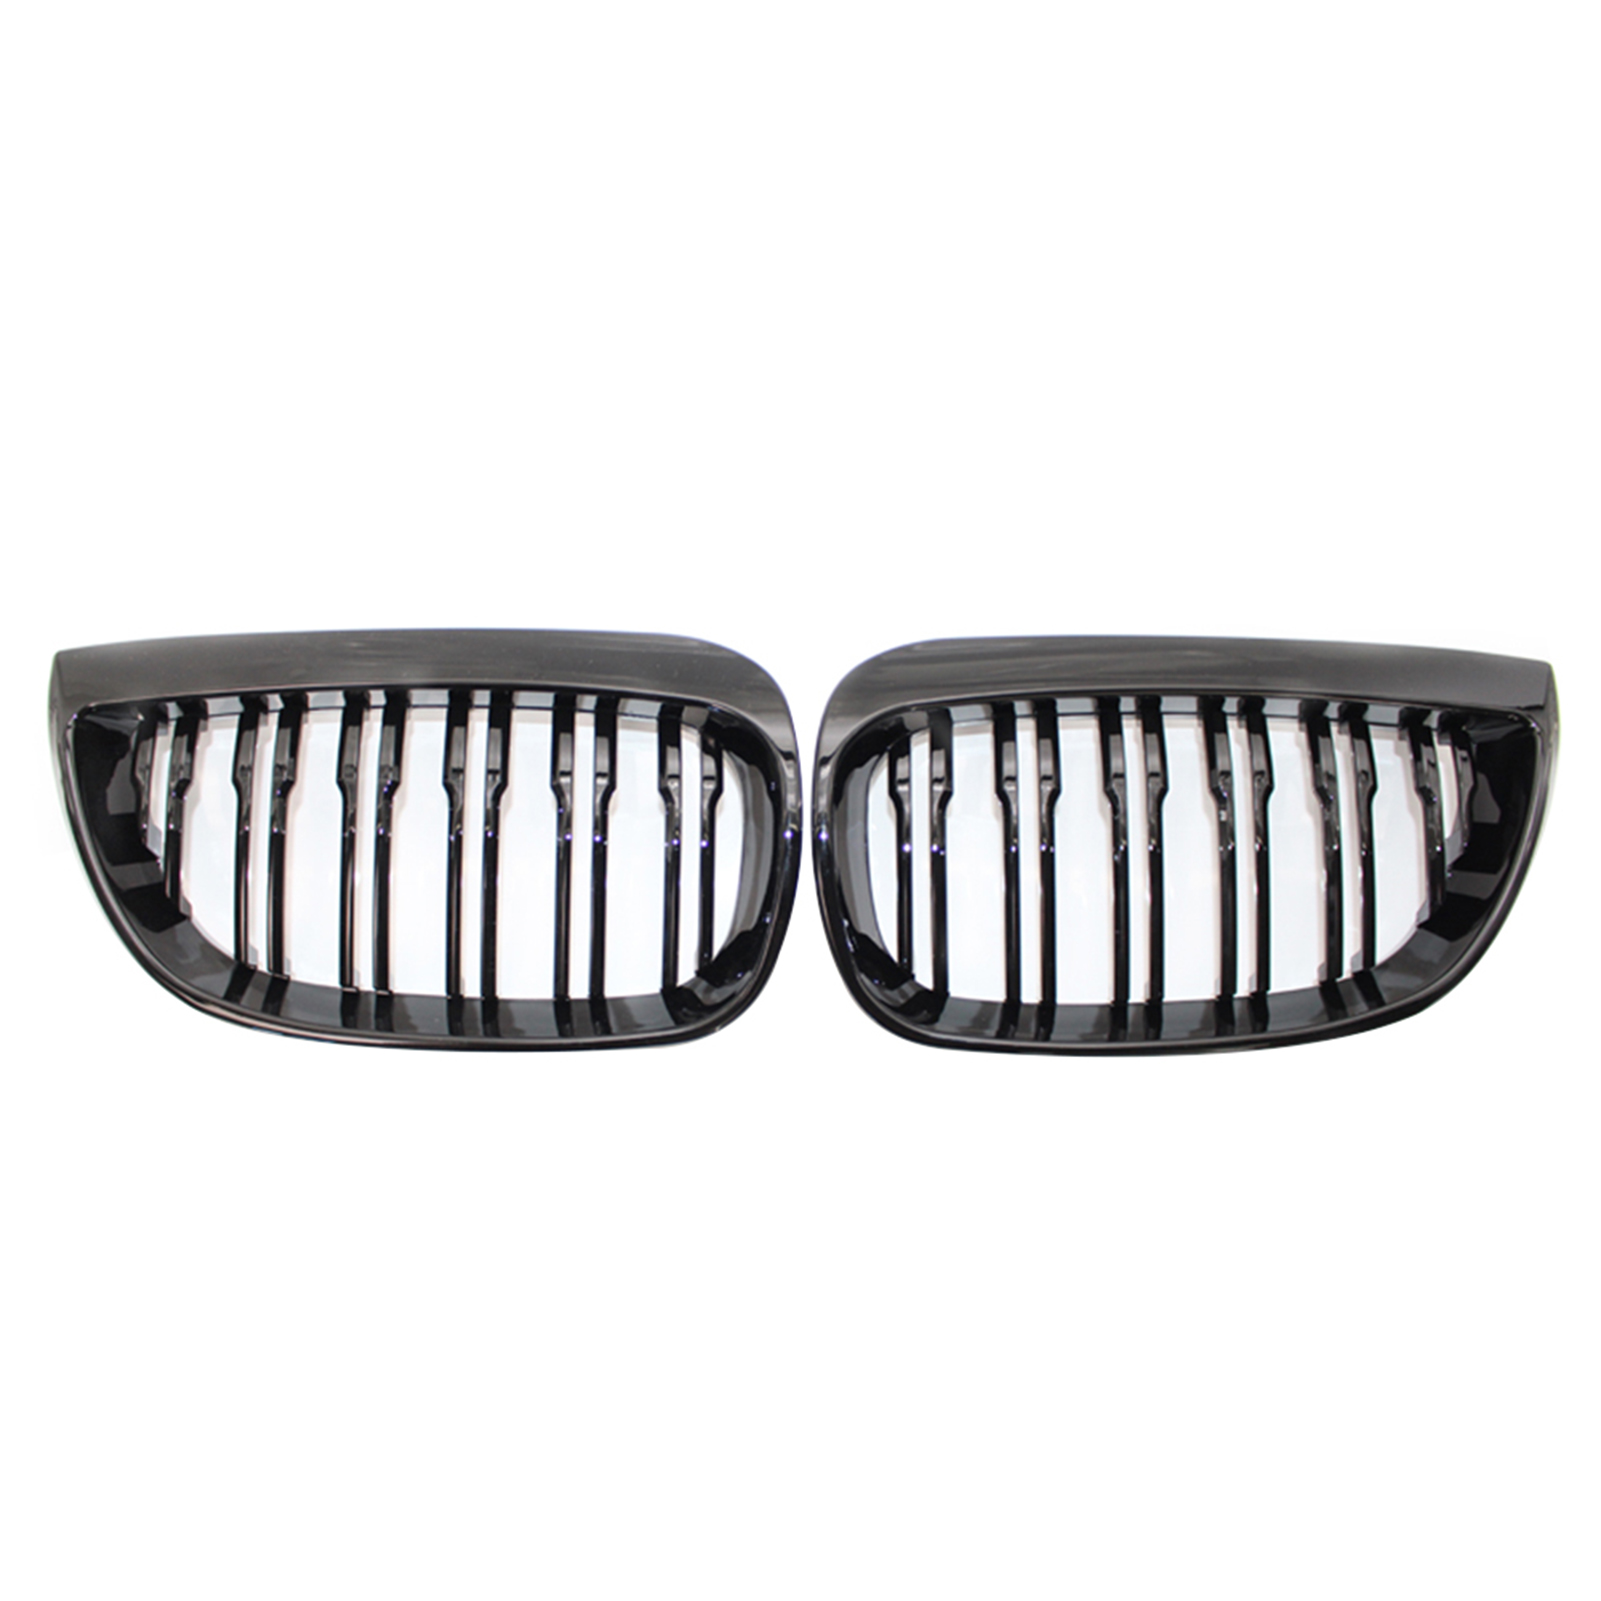 Andoer Pair Front Grille Grills Replacement for 1 Series E81 E87 2004-2007 Car Styling Racing Grills - image 5 of 7